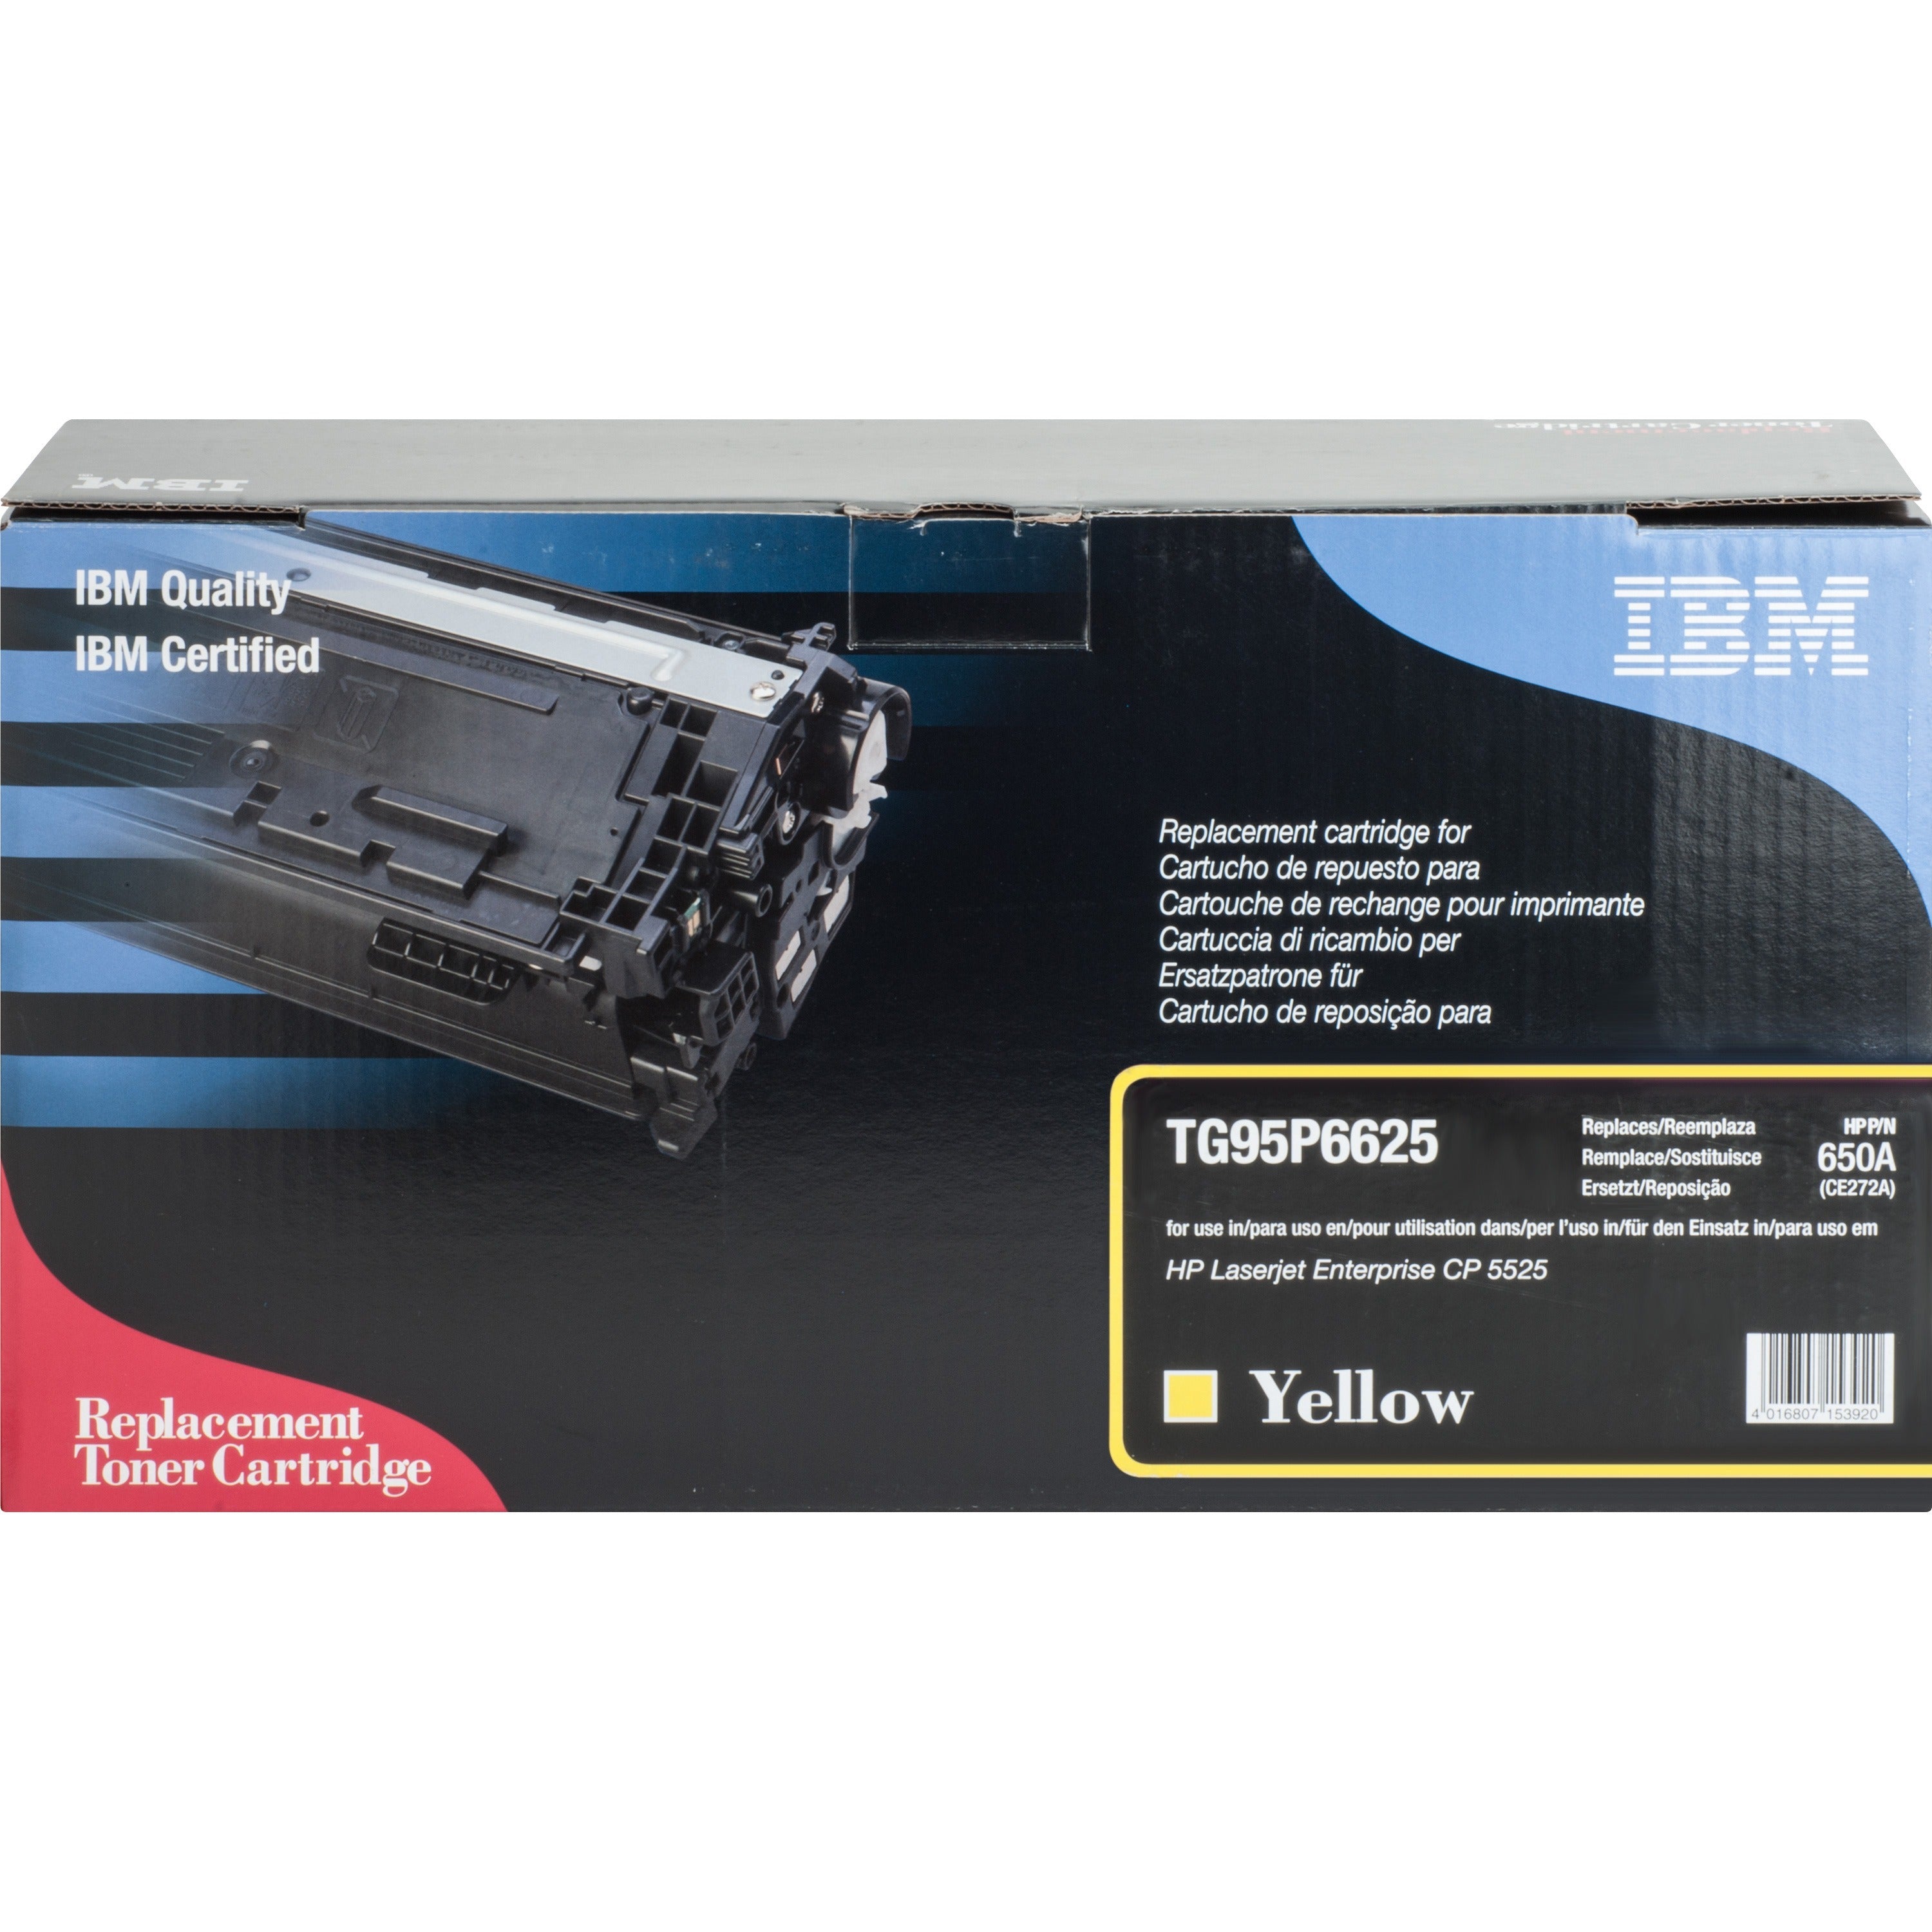 ibm-remanufactured-laser-toner-cartridge-alternative-for-hp-650a-ce272a-yellow-1-each-15000-pages_ibmtg95p6625 - 1